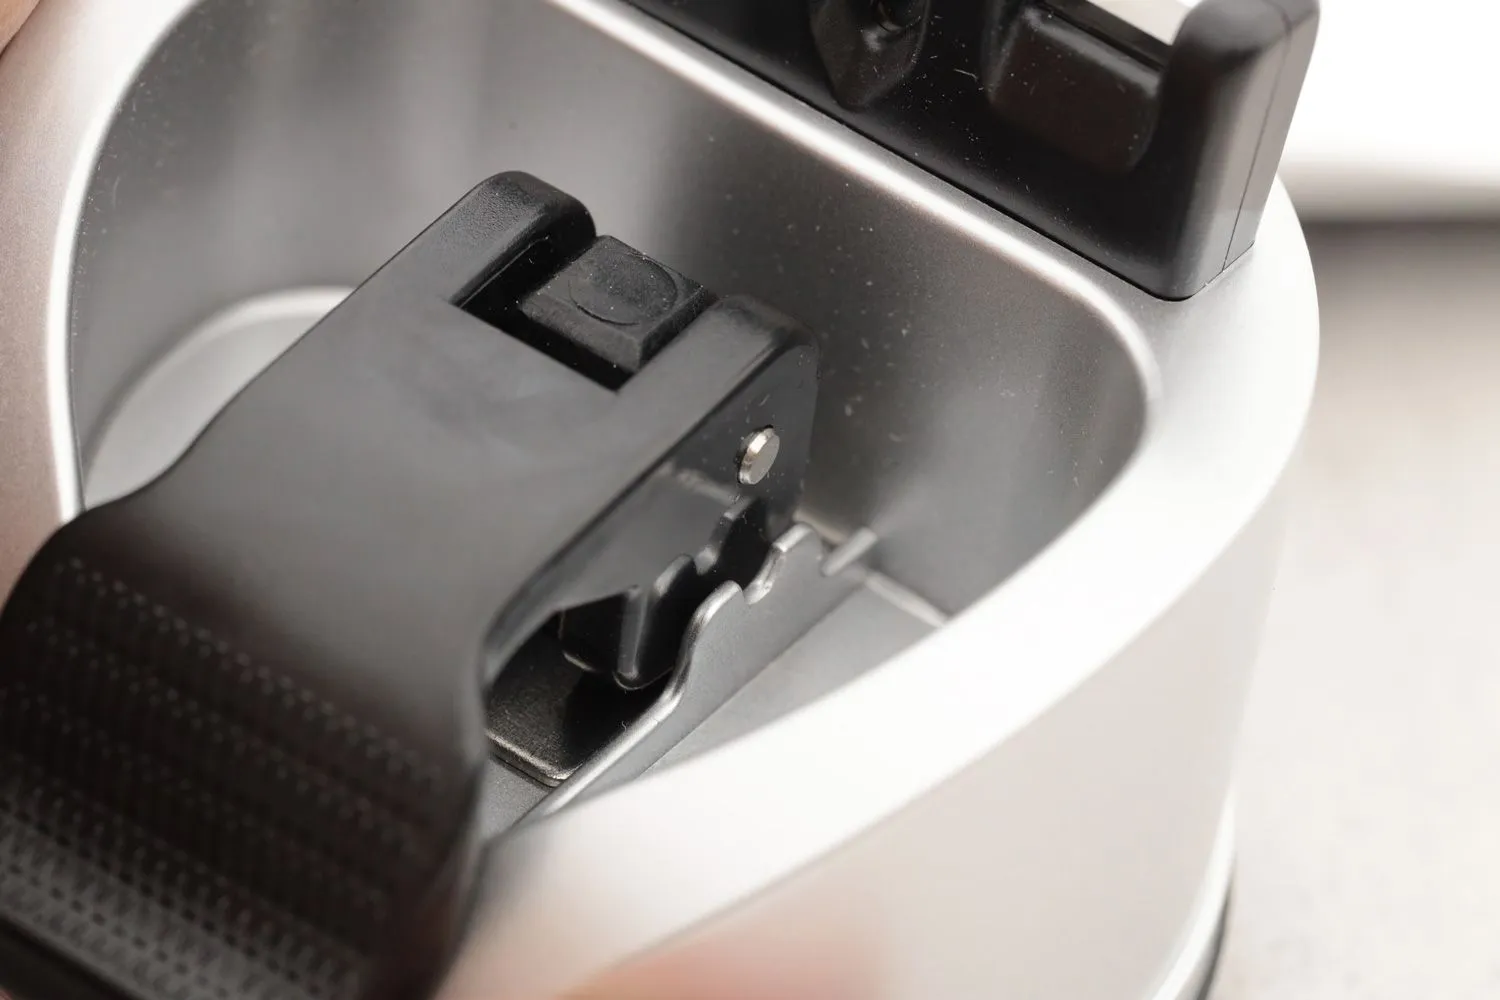 Sharpal 191H Knife Sharpener In-depth Review: Gives You a Sharp